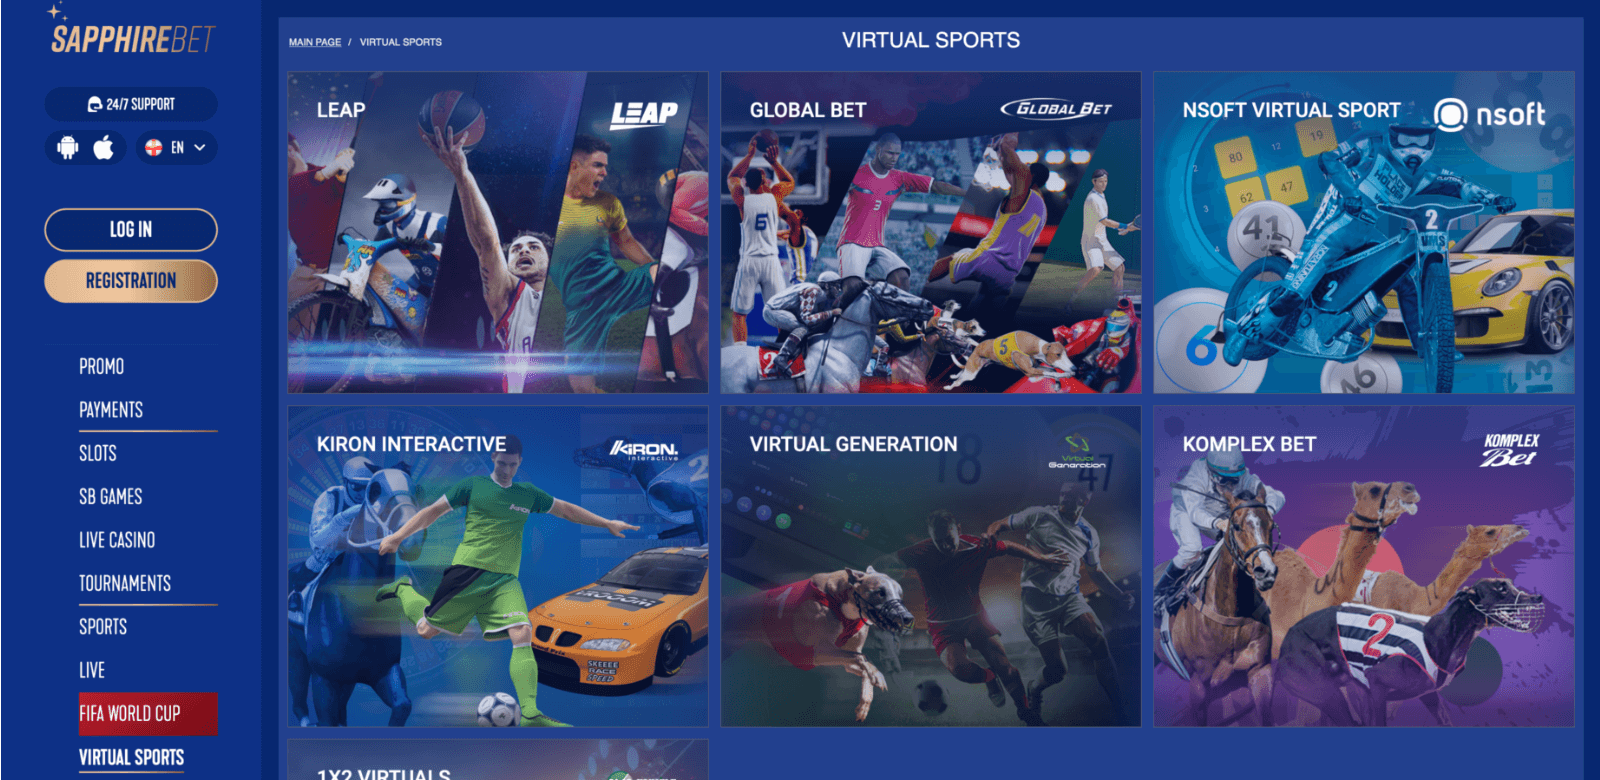 On the SapphireBet website, players from India have the opportunity to bet on Virtual Sports